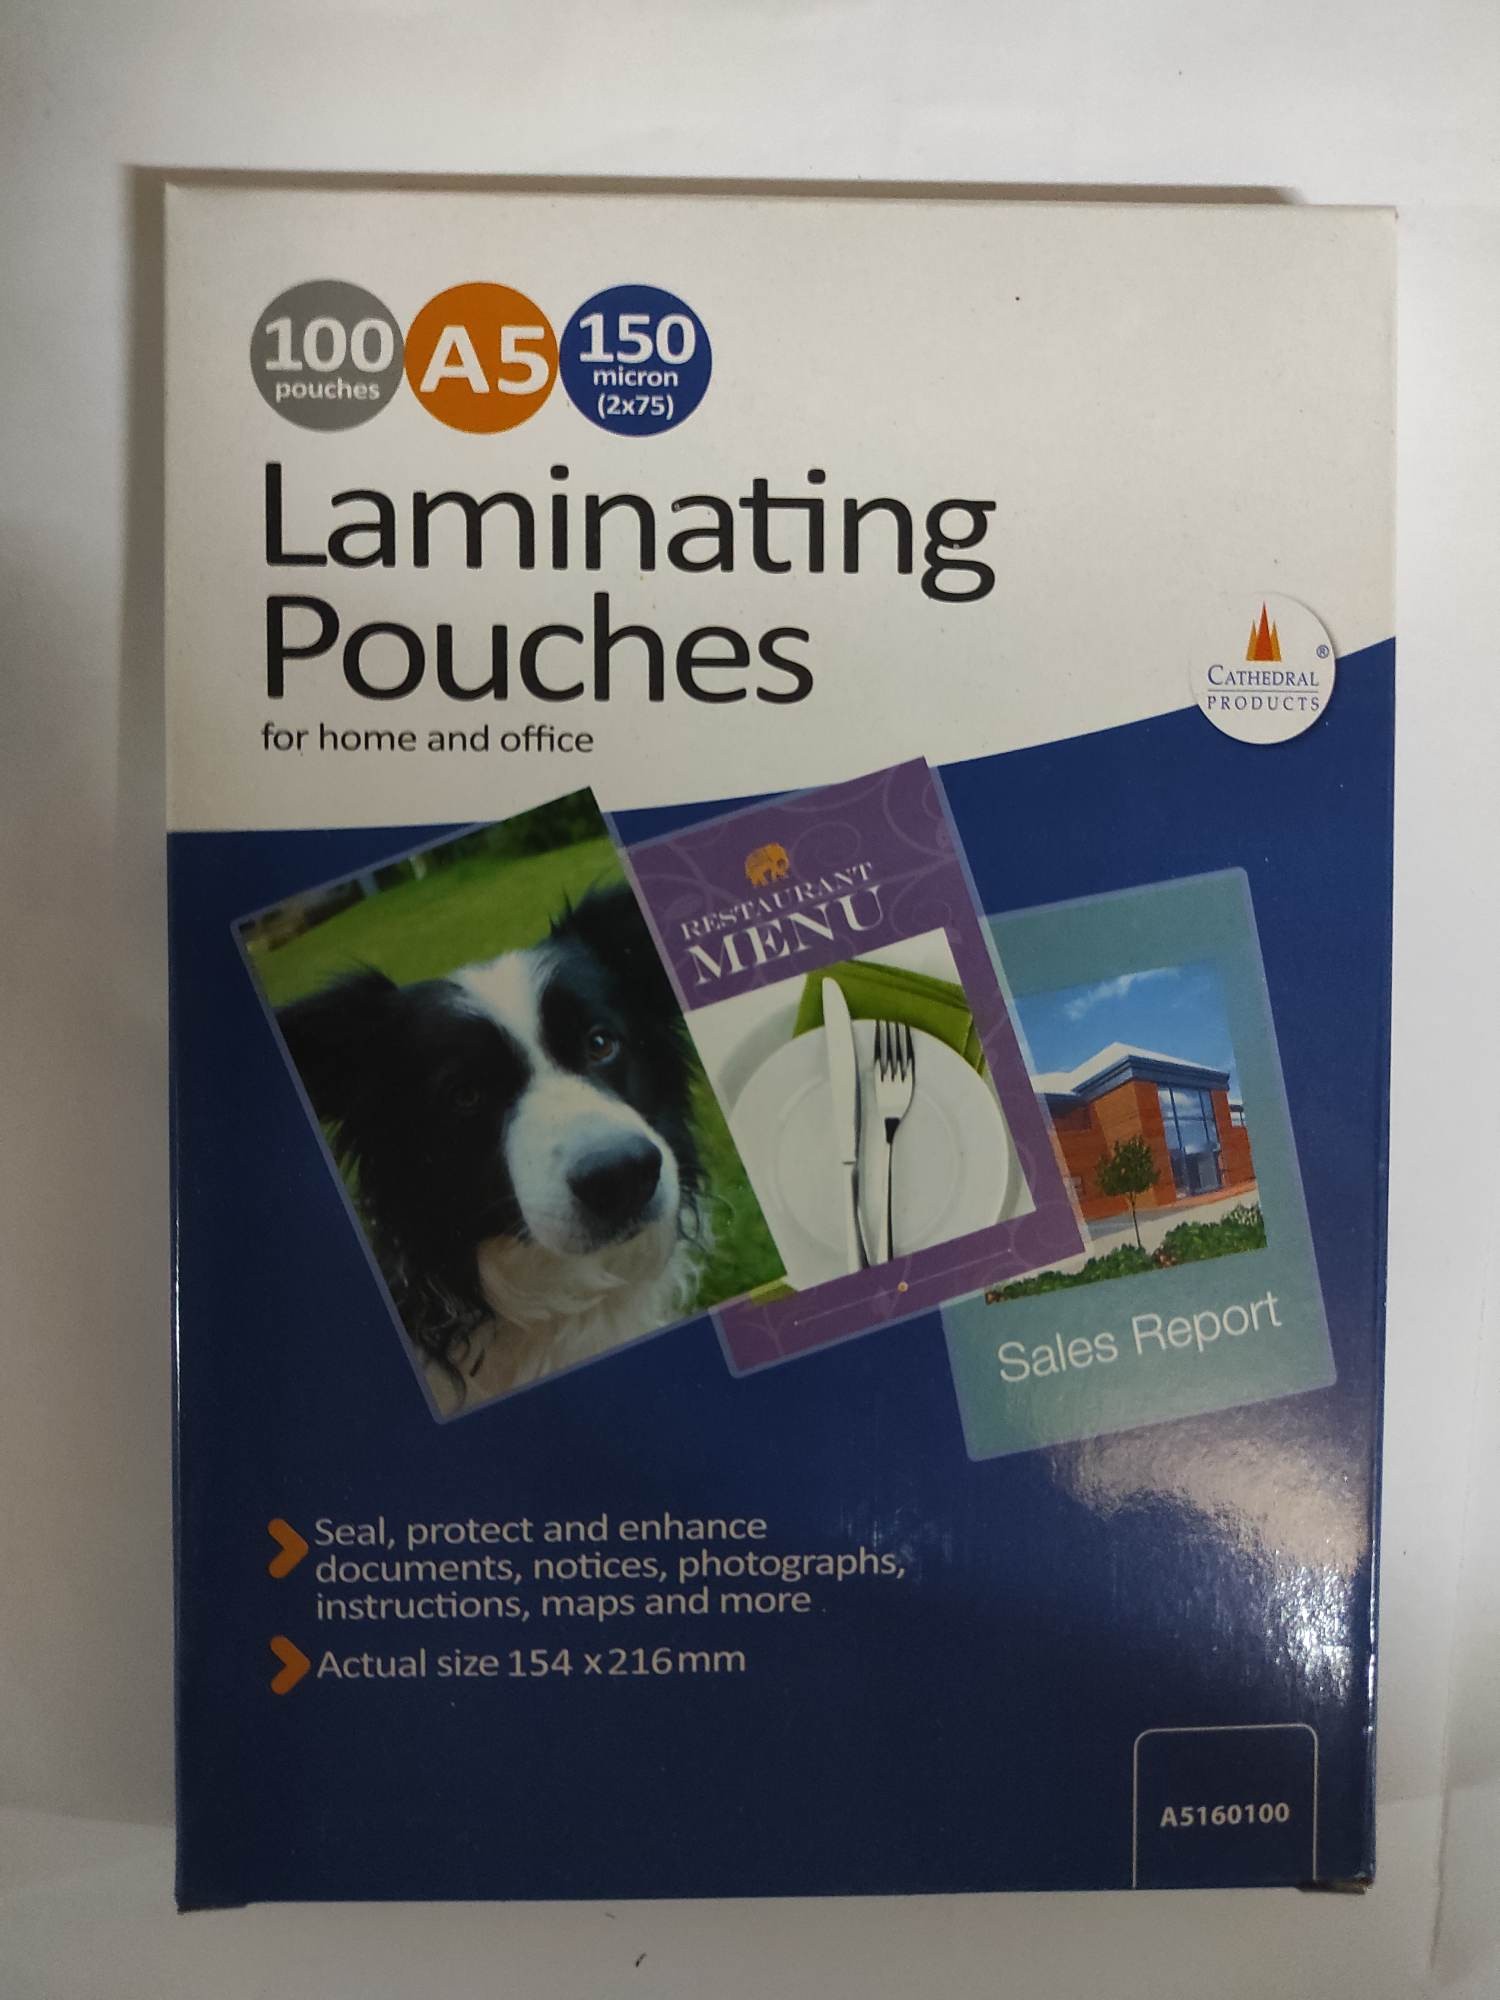 Laminating Pouches A5 - 80 / 160 microns x 100